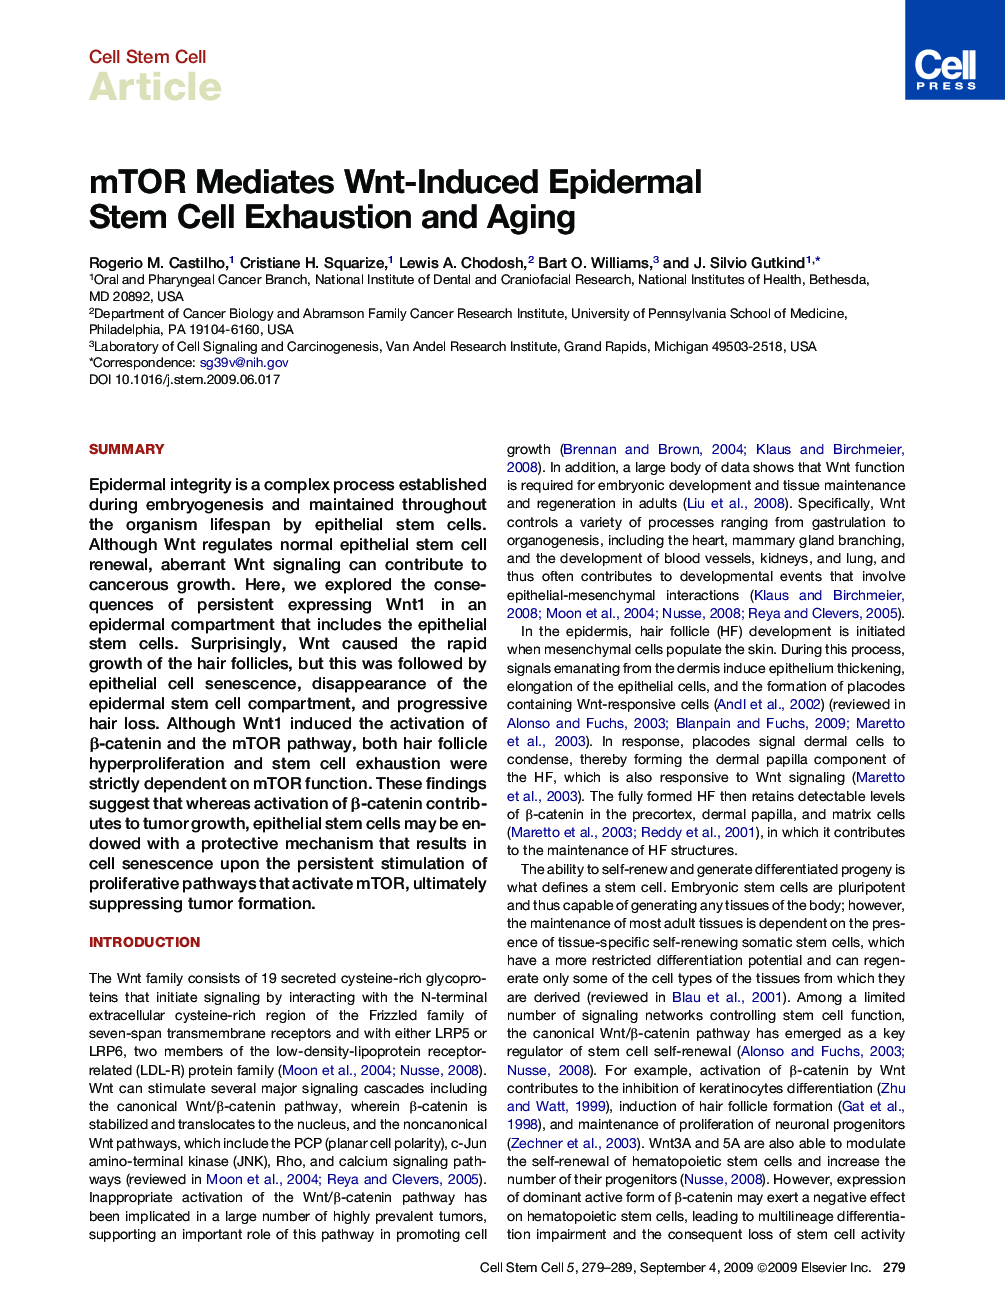 mTOR Mediates Wnt-Induced Epidermal Stem Cell Exhaustion and Aging